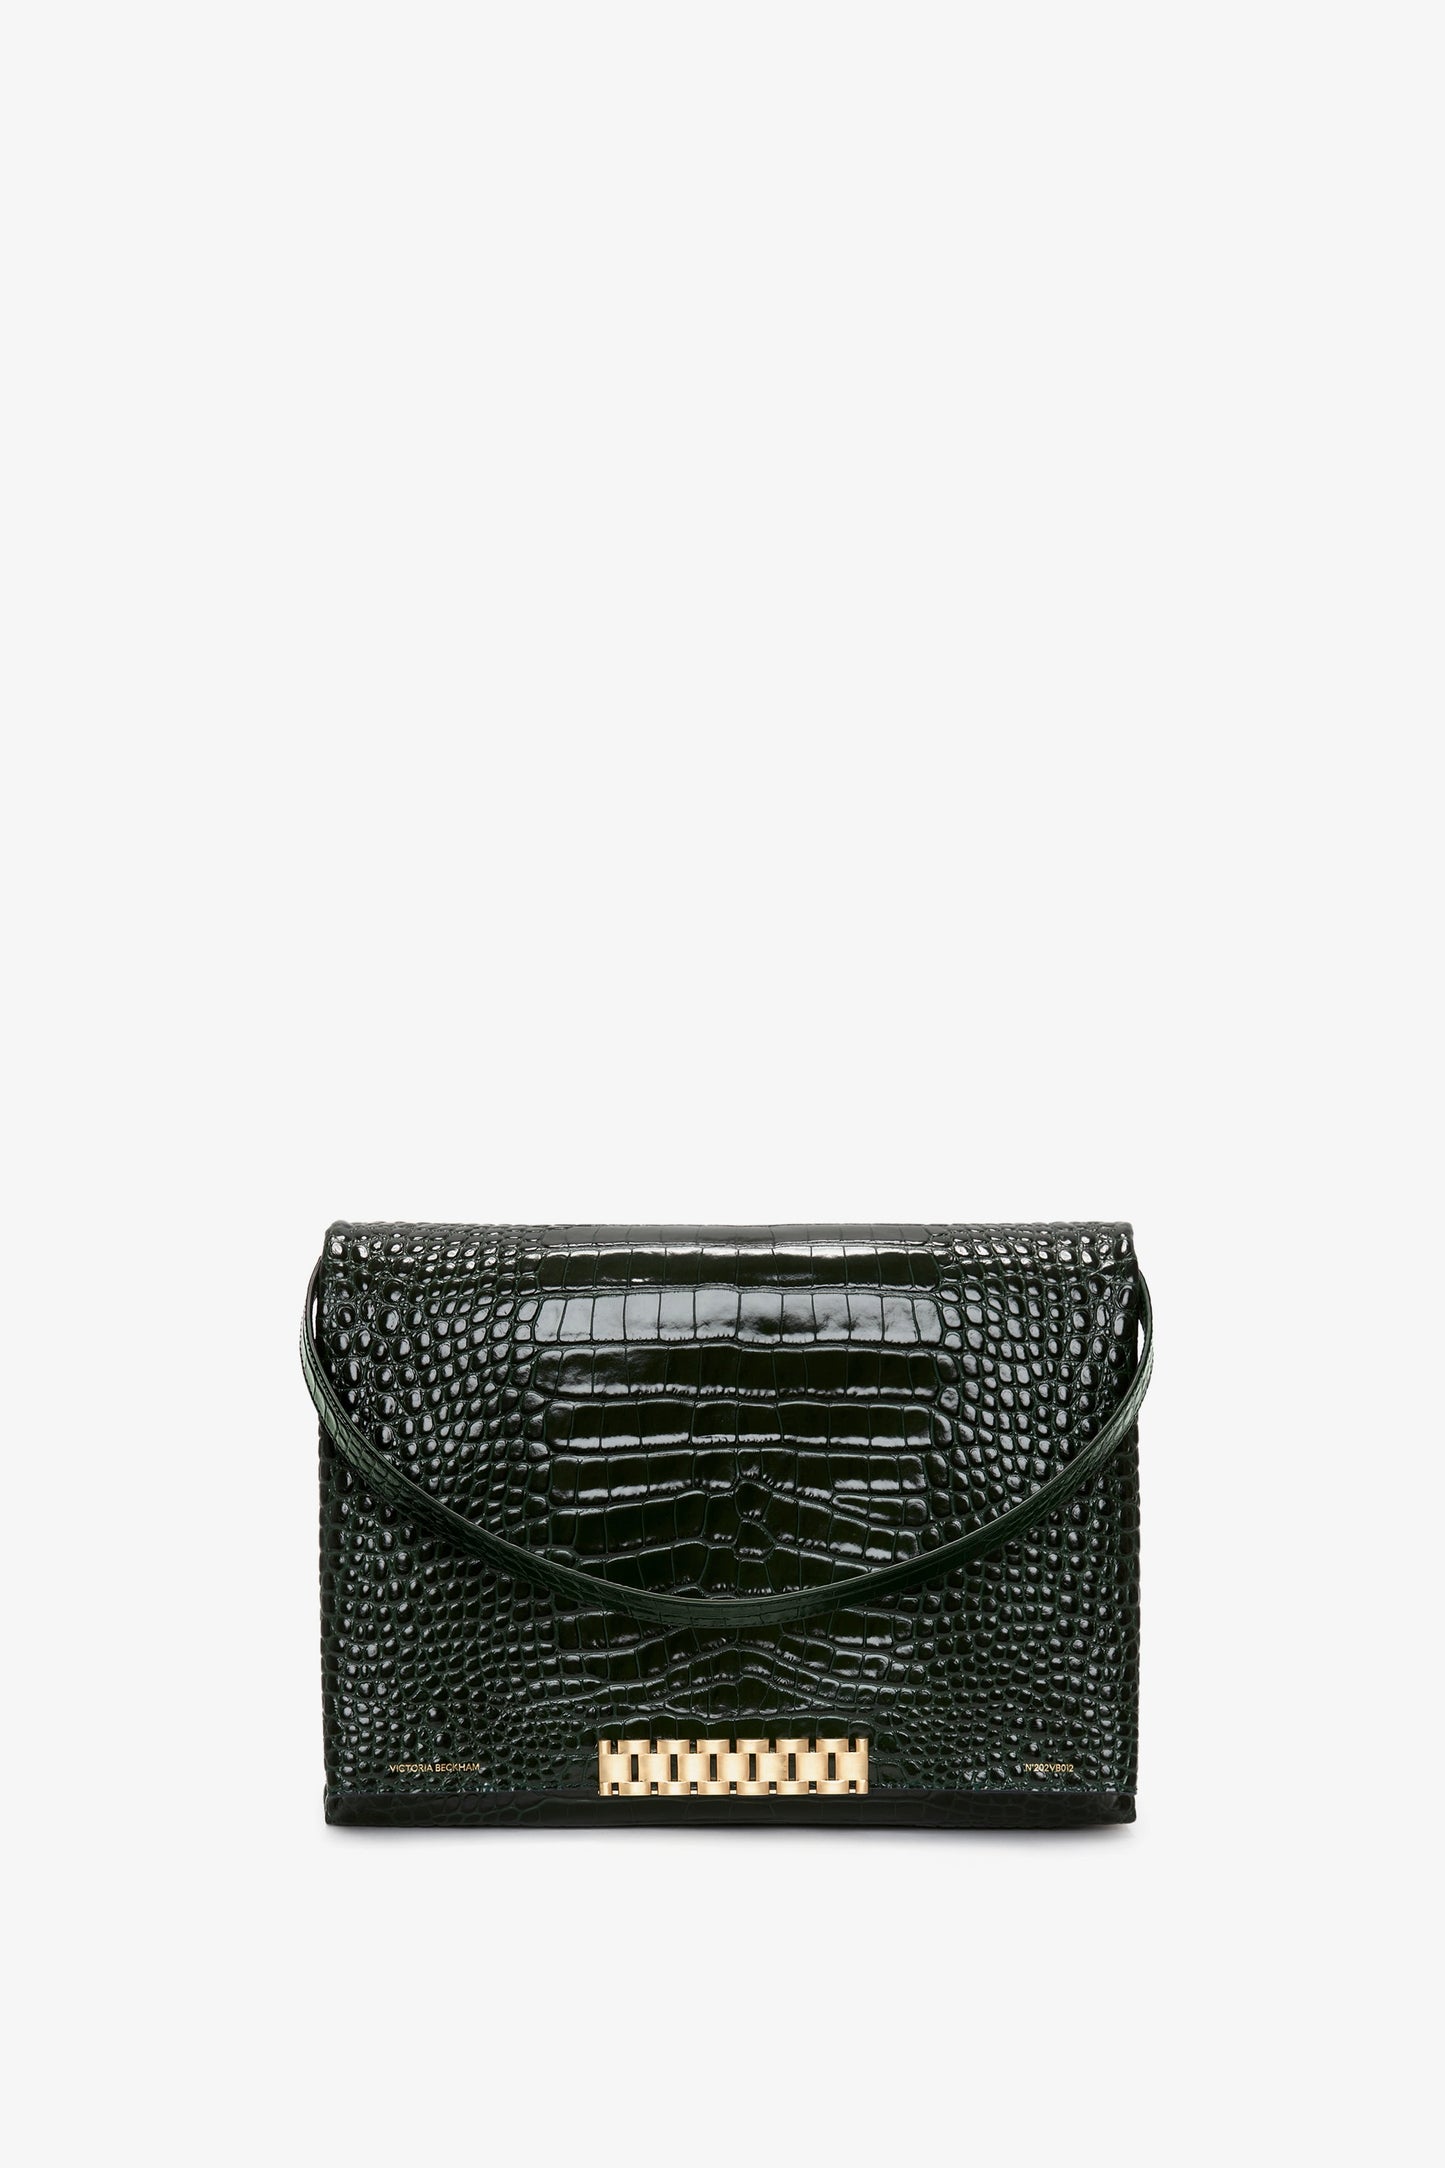 Jumbo Chain Pouch in Dark Forest Croc-Effect Leather